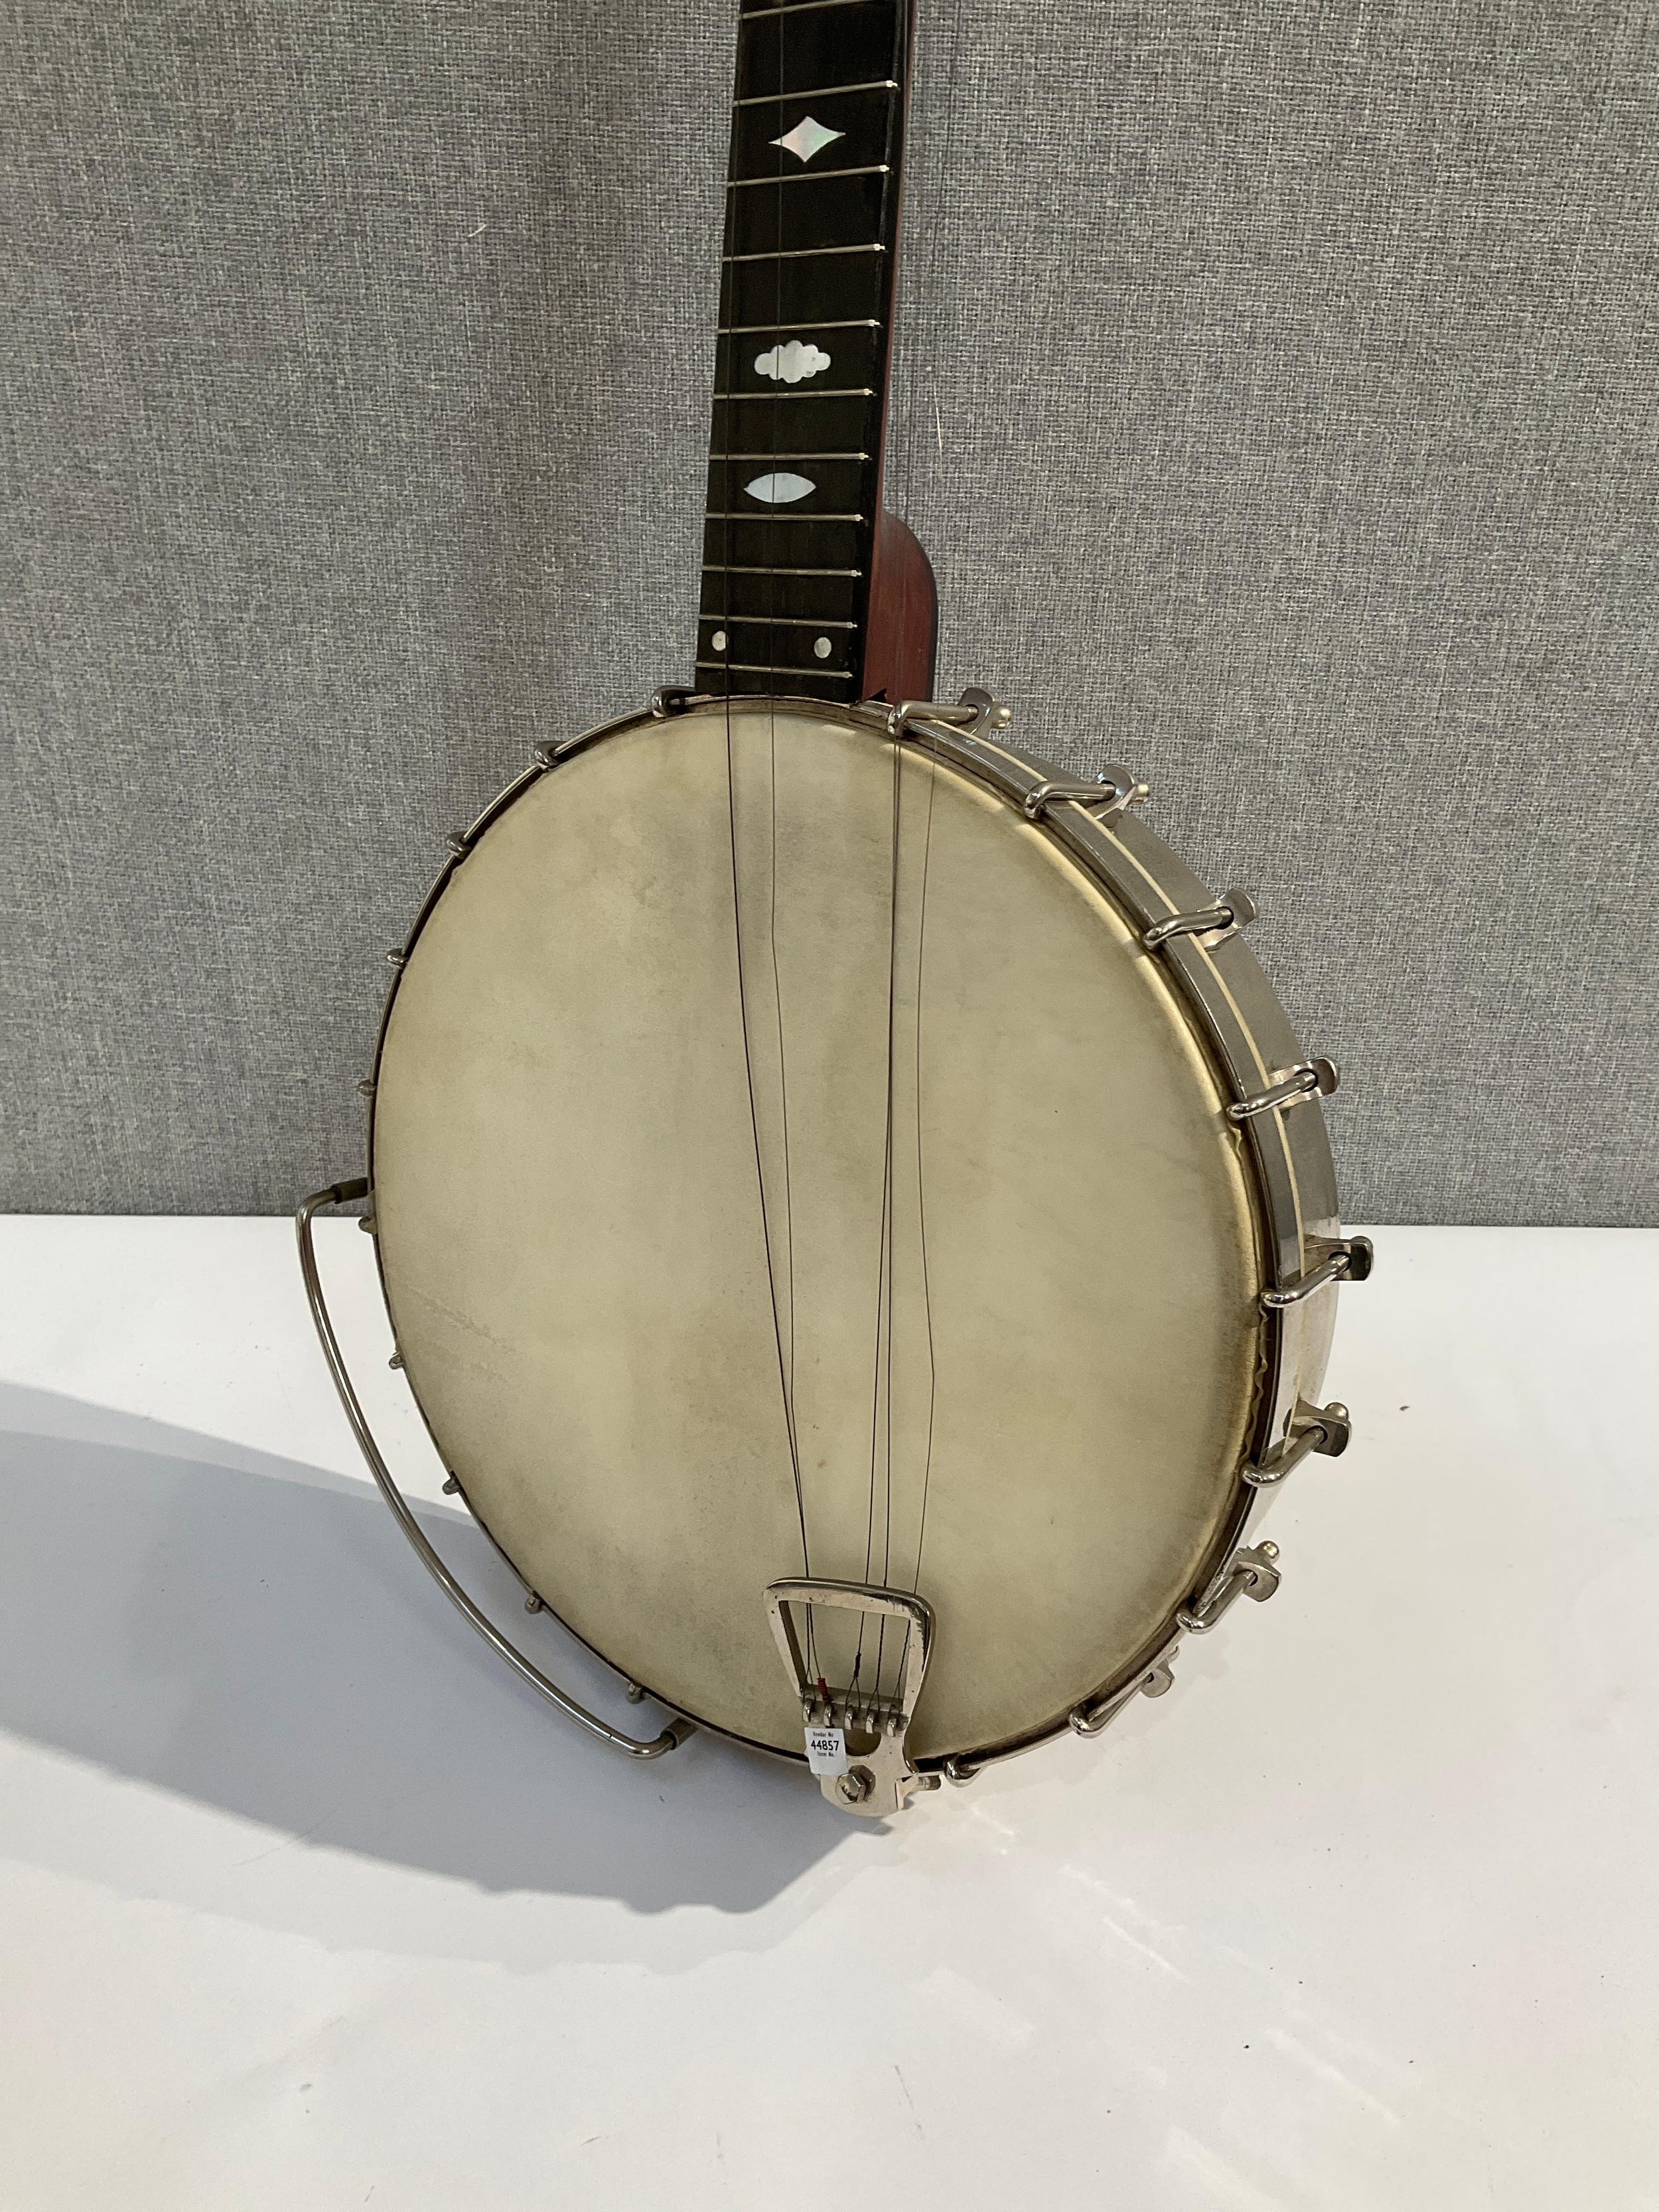 A Clifford Essex Co. Of Bond Street, London banjo circa 1910-20, open back with mother of pearl - Image 3 of 5